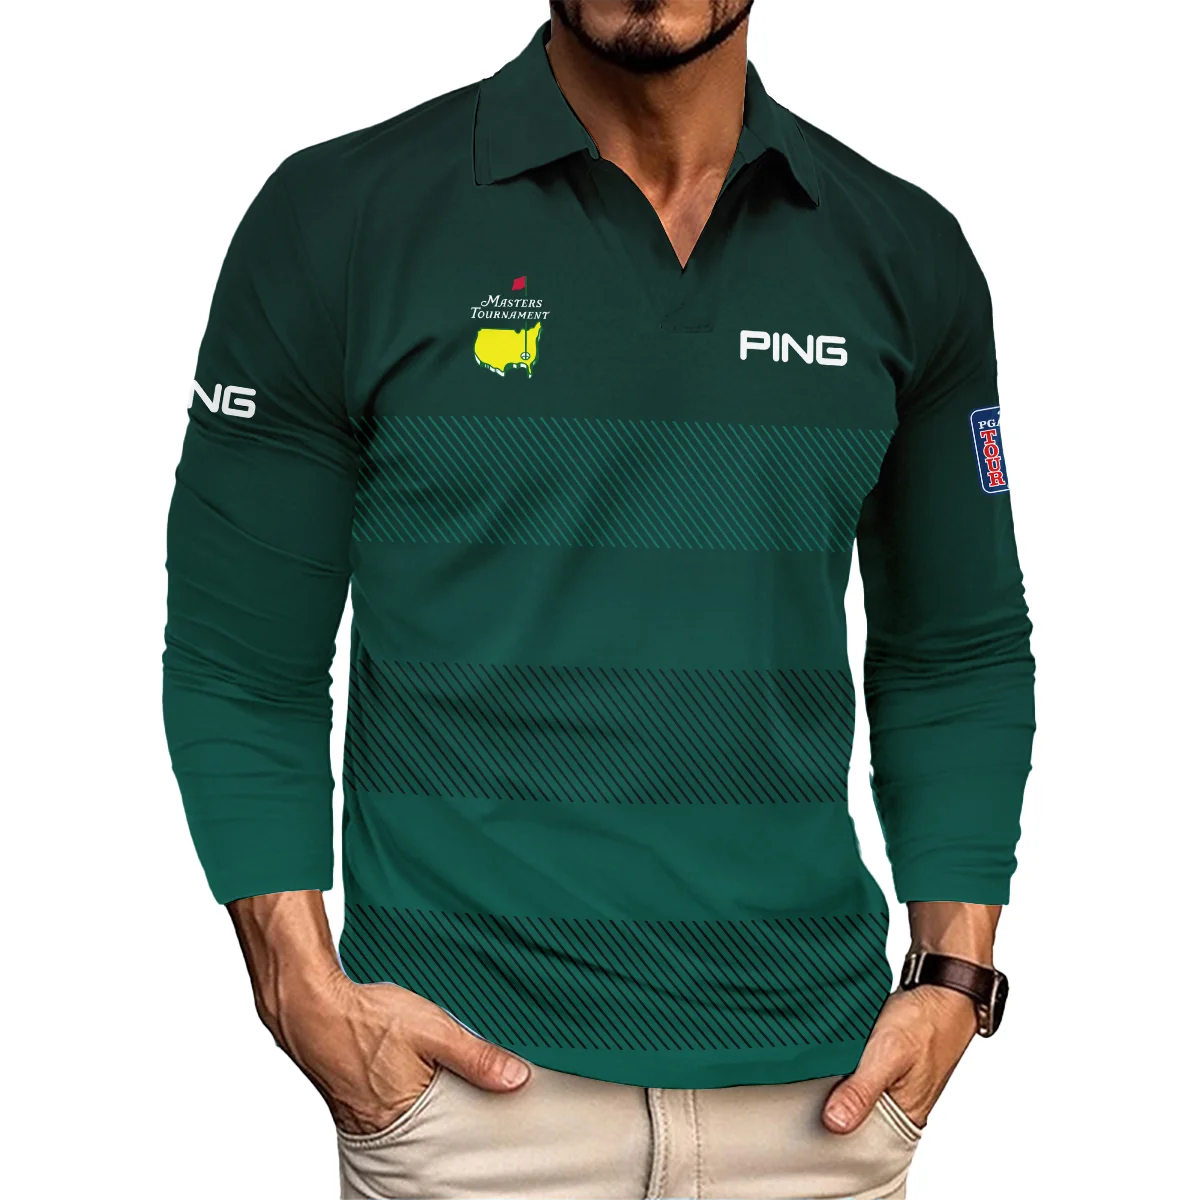 Ping Masters Tournament Dark Green Gradient Stripes Pattern Golf Sport Vneck Long Polo Shirt Style Classic Long Polo Shirt For Men